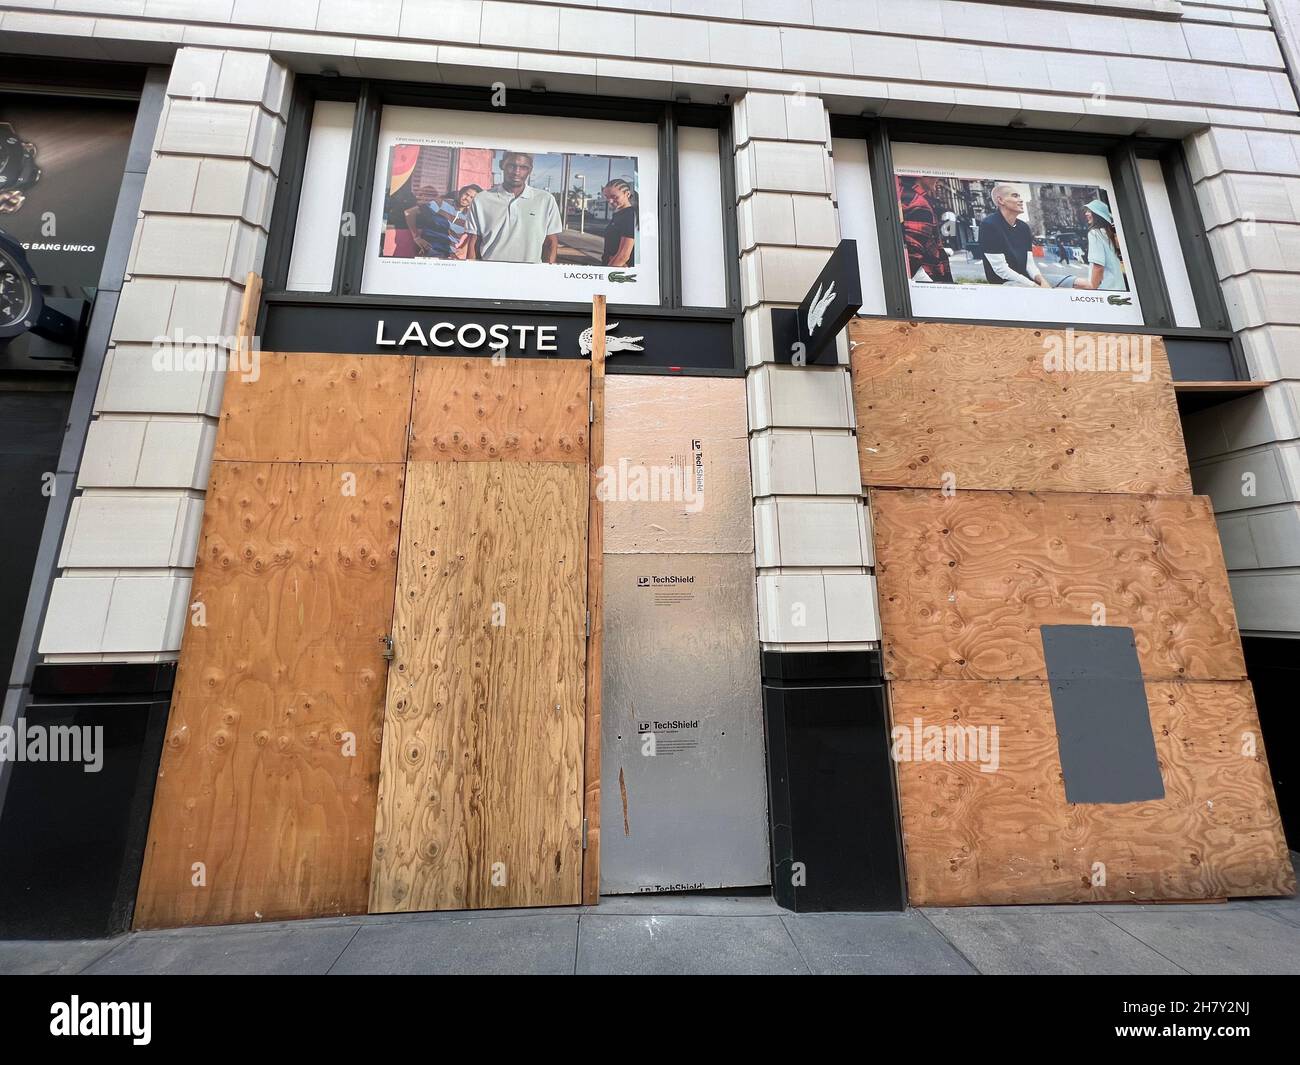 San Francisco, United States. 25th Nov, 2021. The windows of the Lacoste  store in Union Square in San Francisco, California remain boarded up on  Nov. 25, 2021. Videos on social media showed